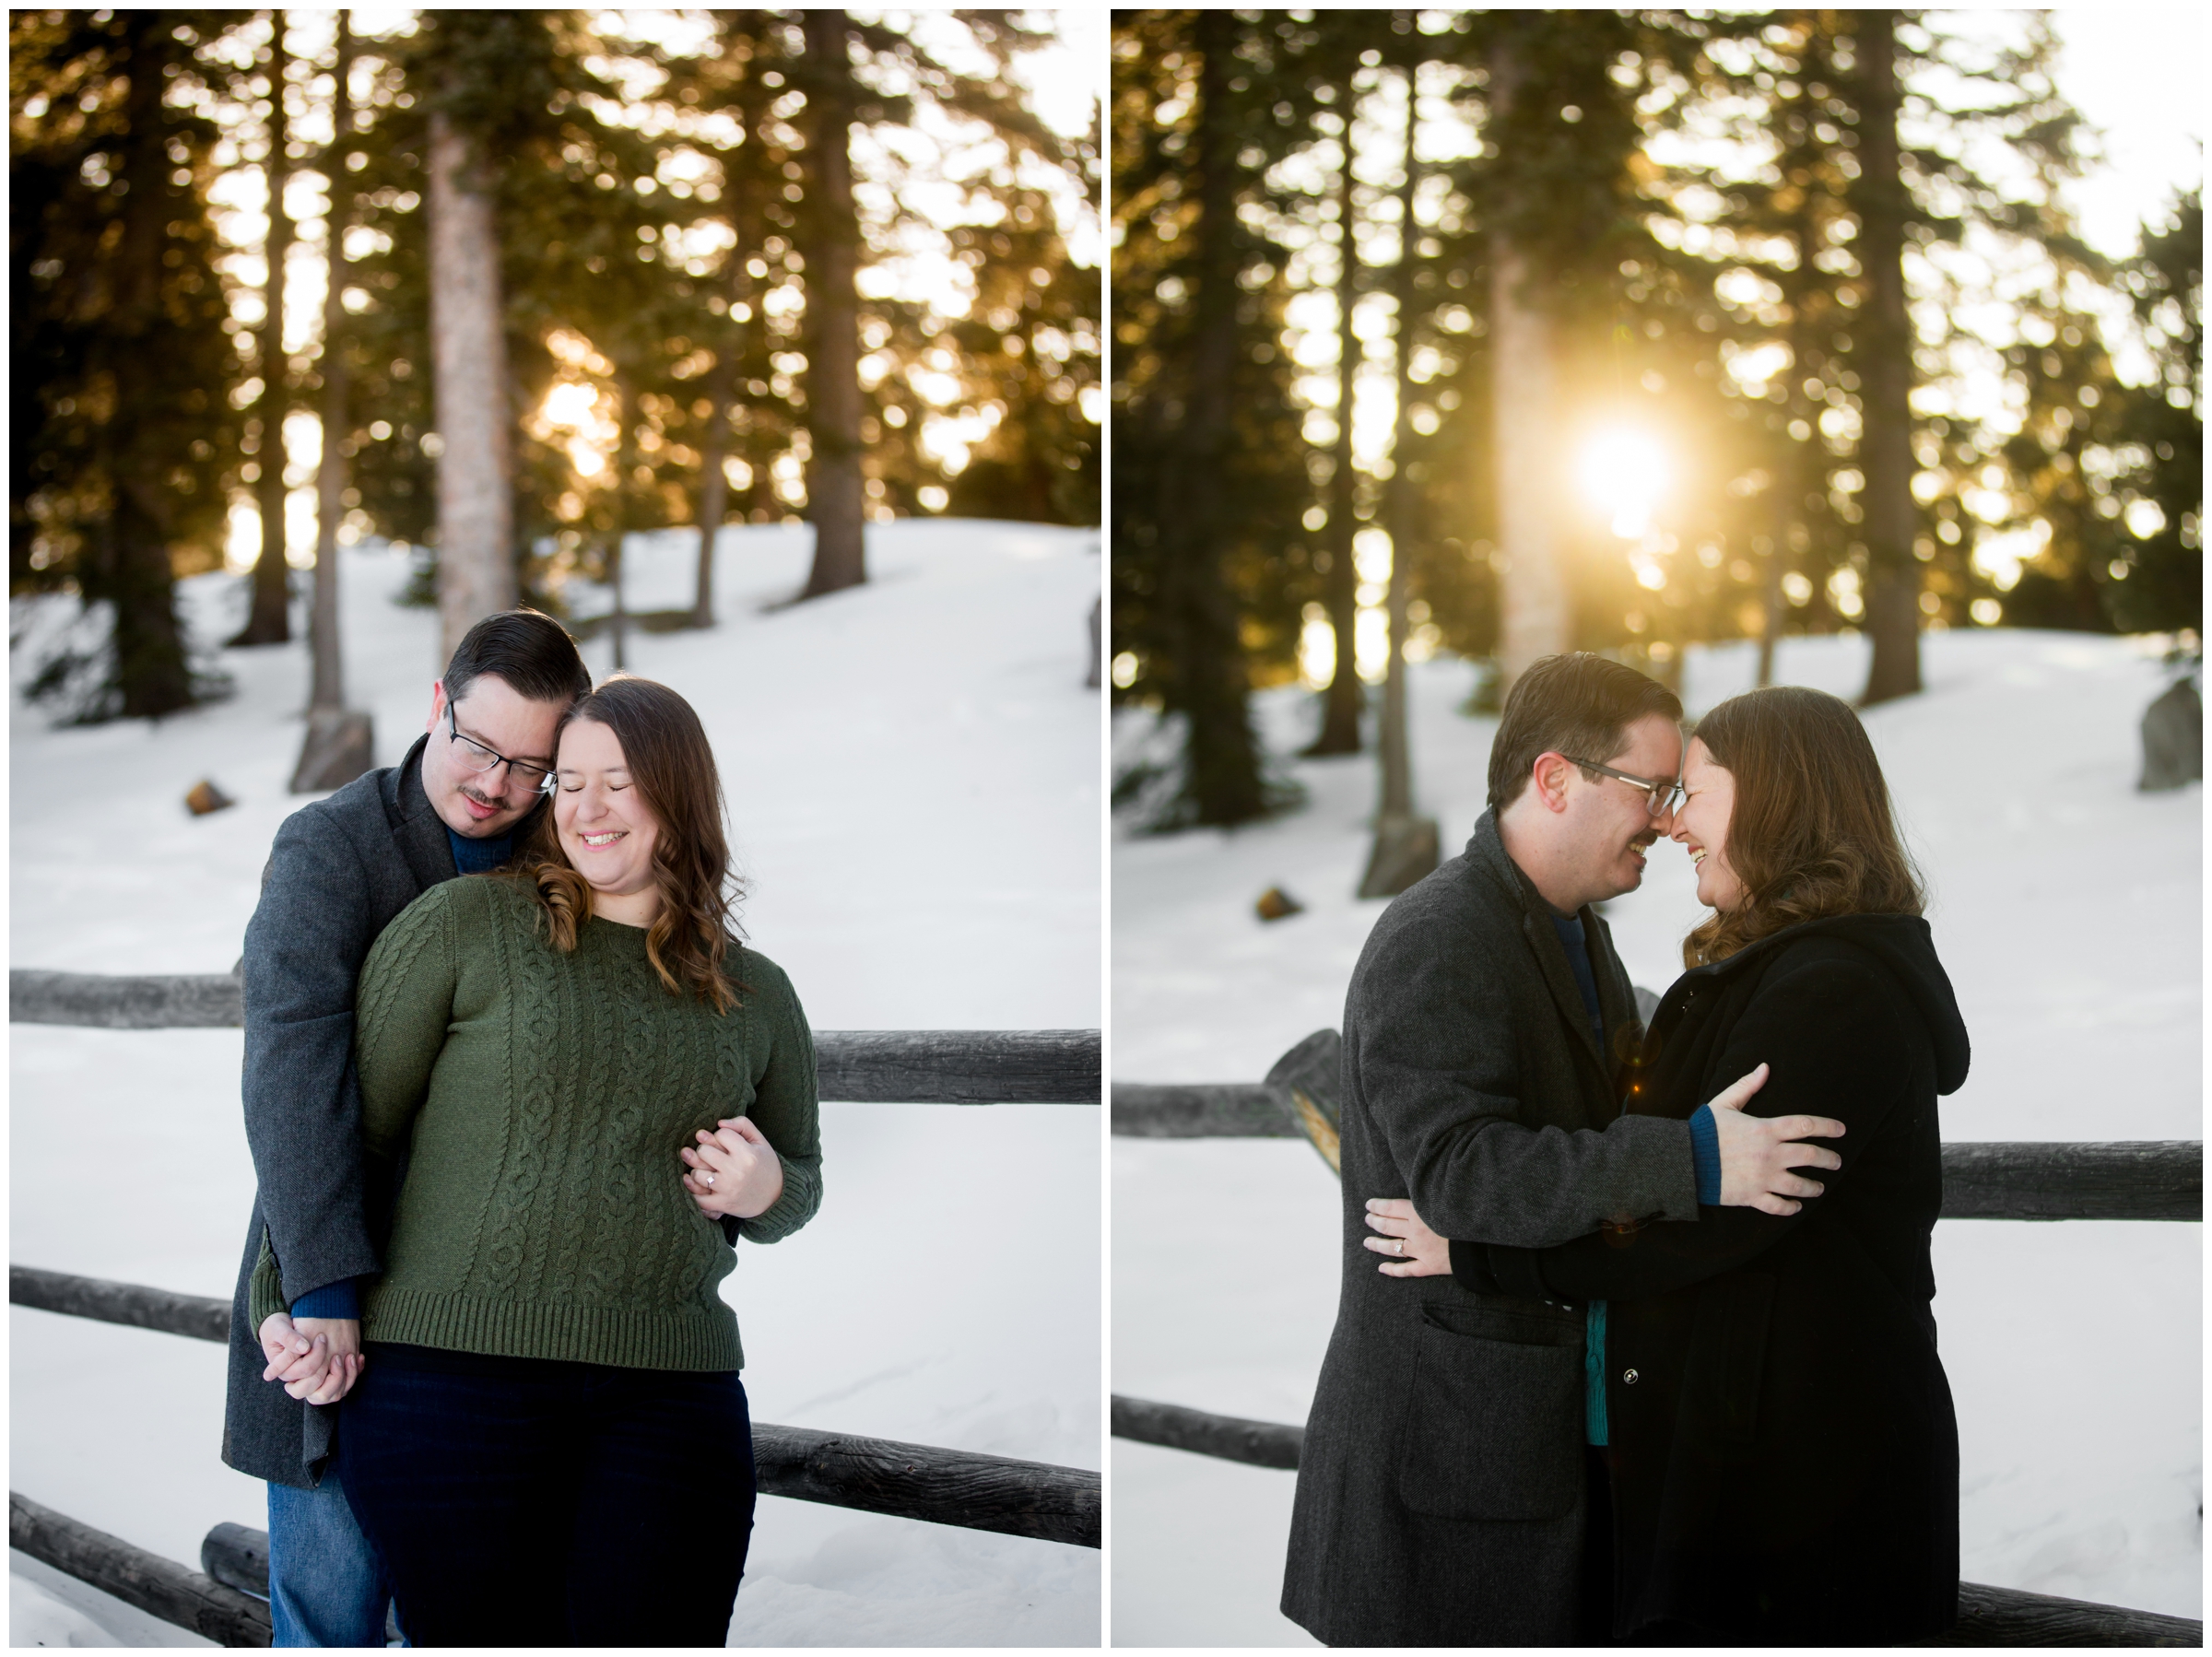 Echo Lake engagement photos during winter by Colorado mountain wedding photographer Plum Pretty Photography